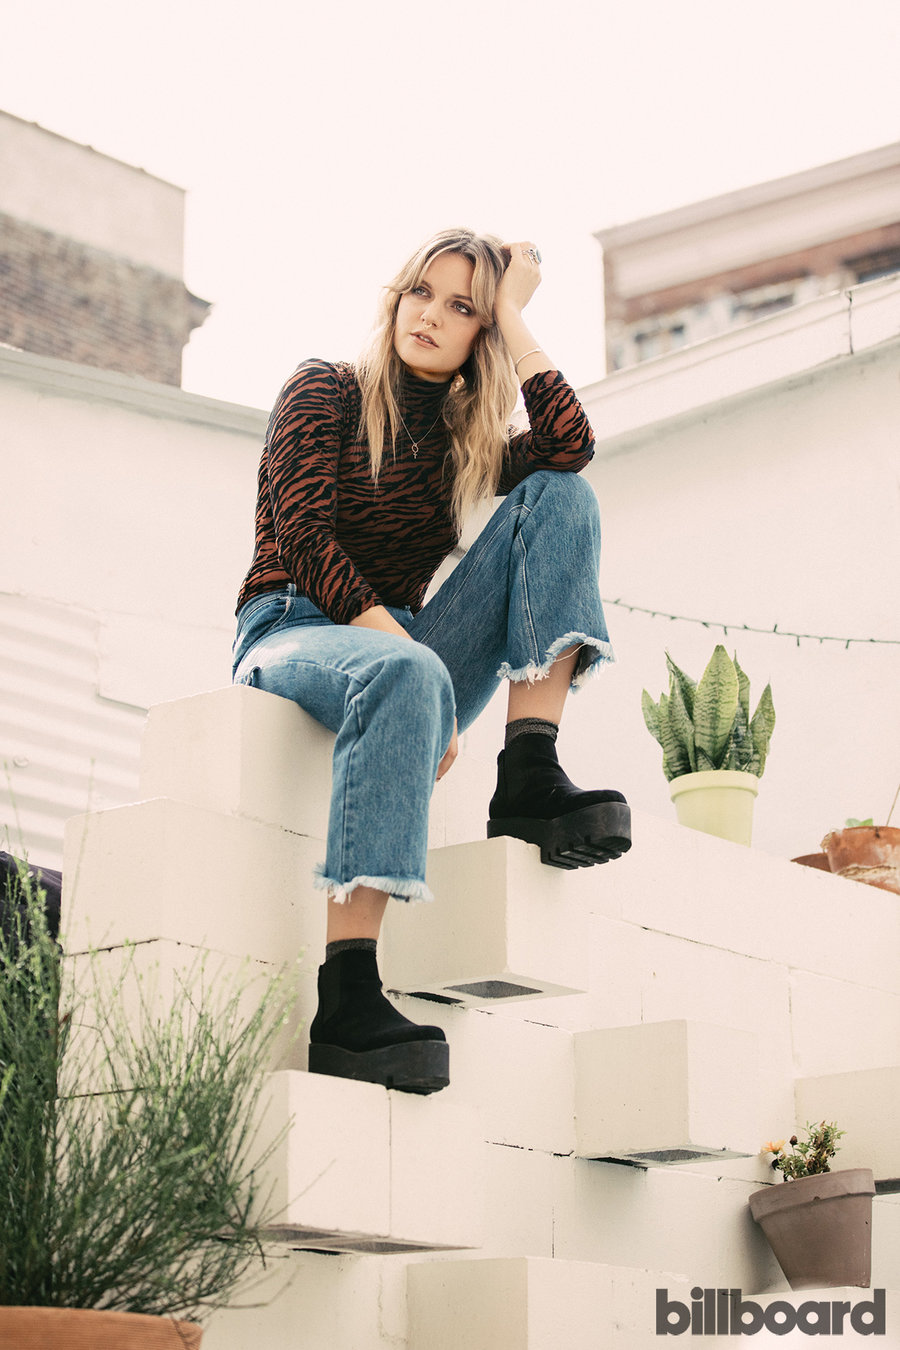 Tove poses for a Billboard special